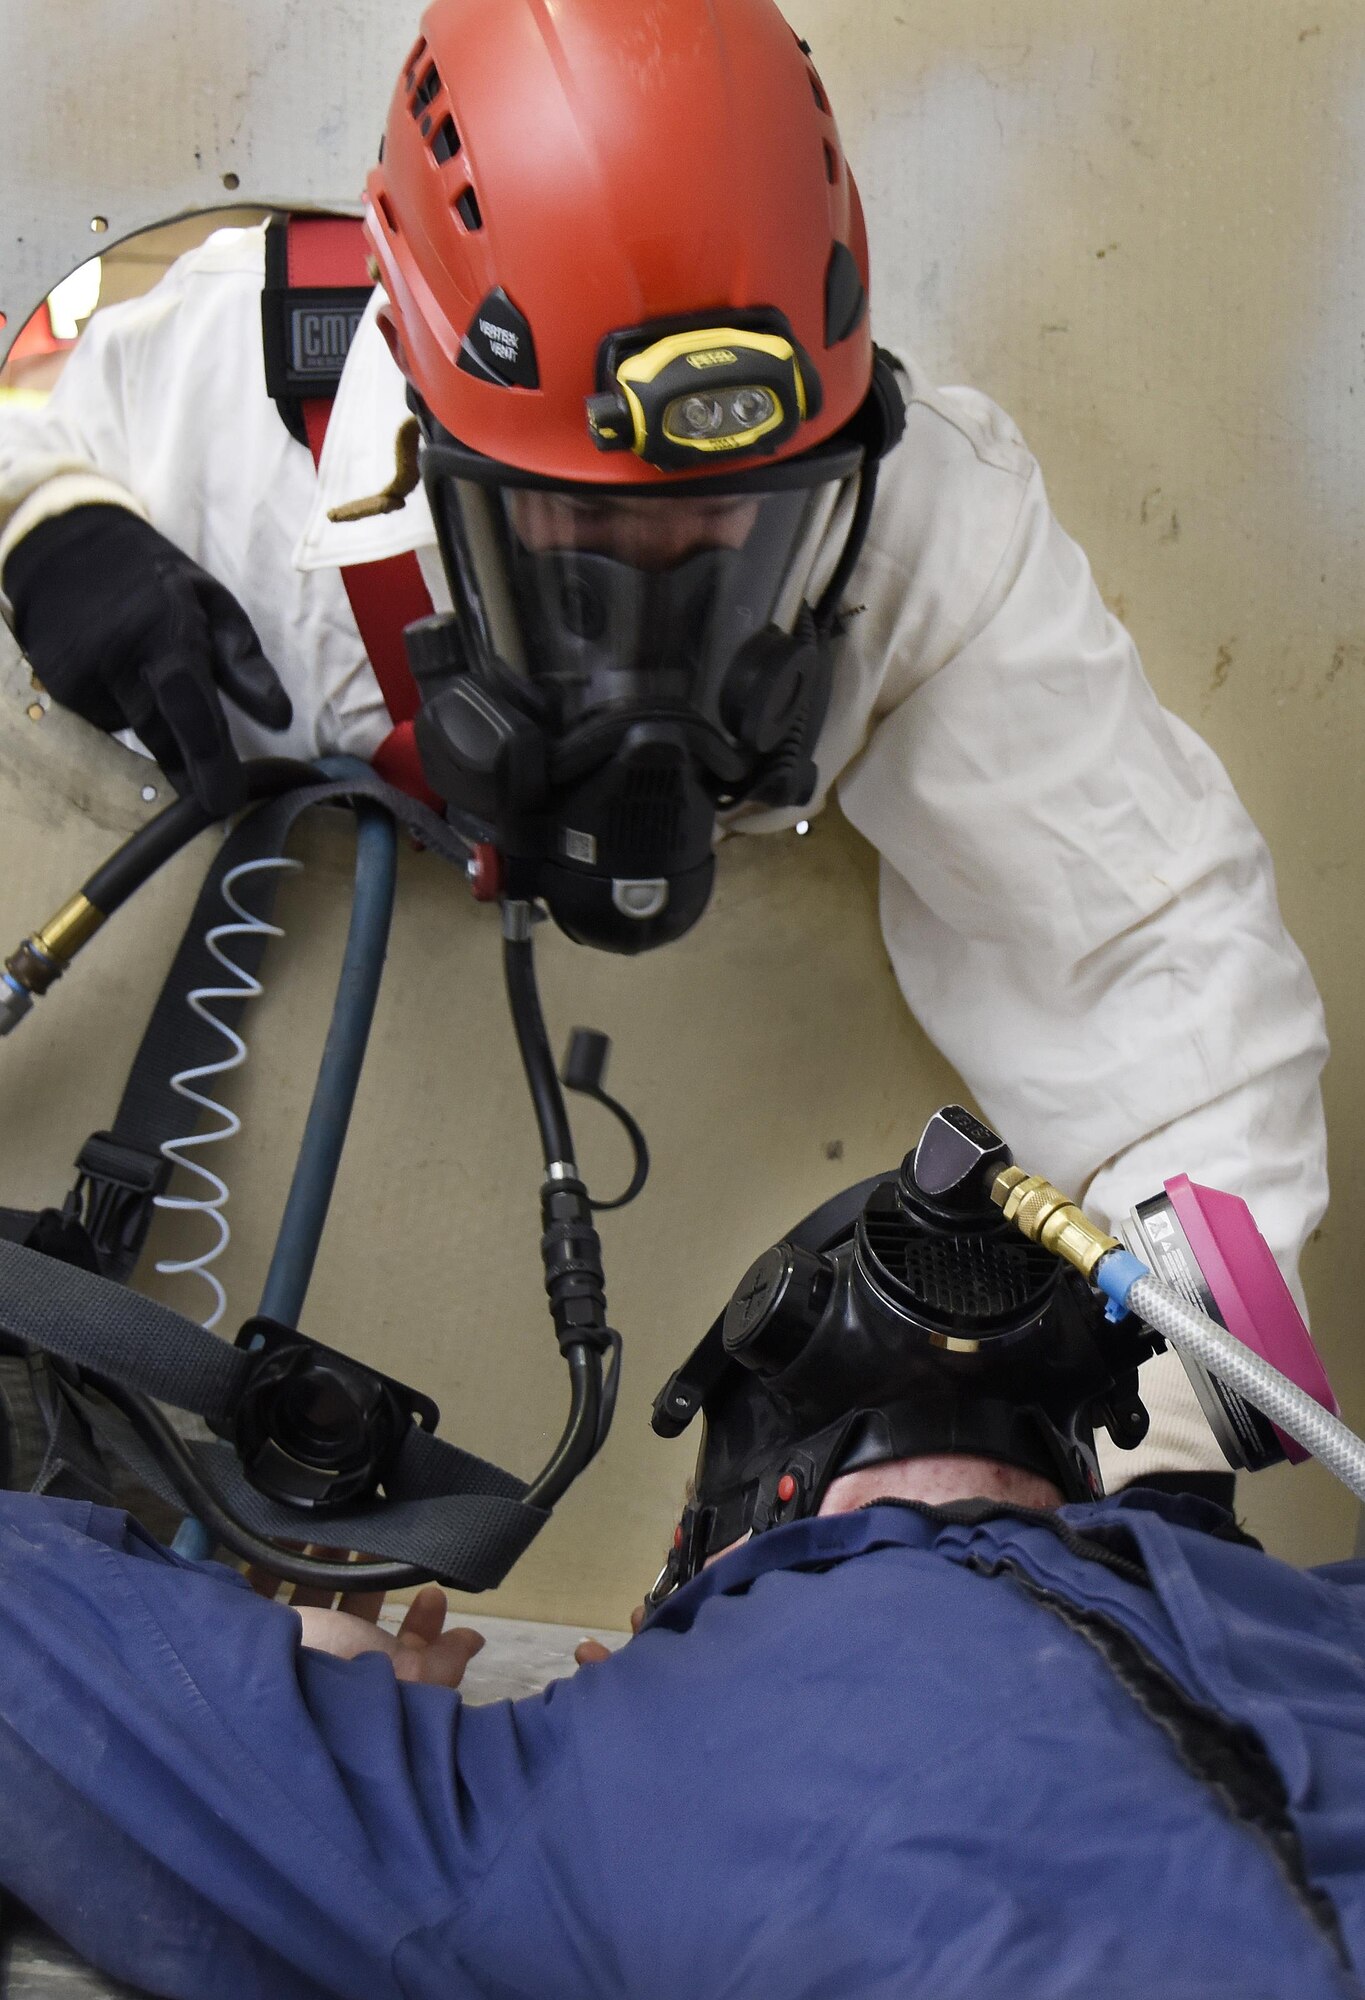 A U.S. Air Force rescue crew Airman with the 379th Expeditionary Civil Engineer Squadron Fire Department extracts a role player simulating a simulating a technician being trapped in a fuel cell during a confined space training exercise at Al Udeid Air Base, Qatar, April 14, 2017. Rescue crew Airmen maintain their readiness with training exercises to mitigate possible mishaps.  (U.S. Air Force photo by Senior Airman Cynthia A. Innocenti)